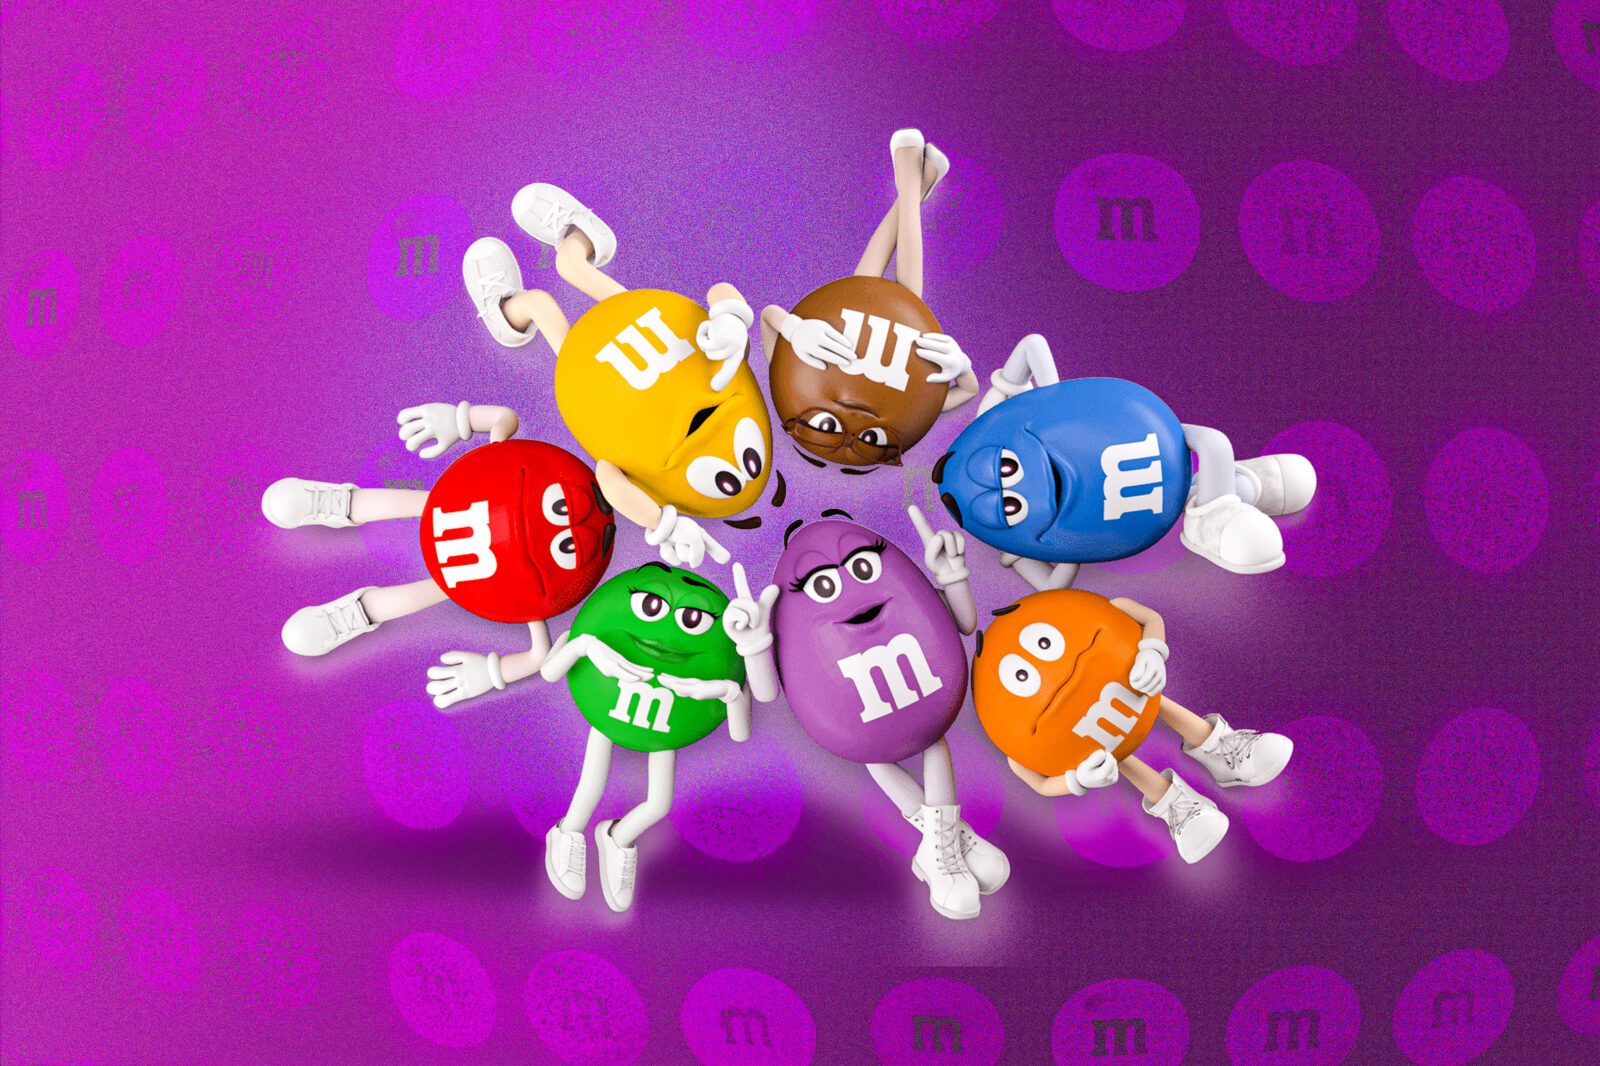 Did M&M's Get Canceled by Tucker Carlson? Tweet May be Super Bowl